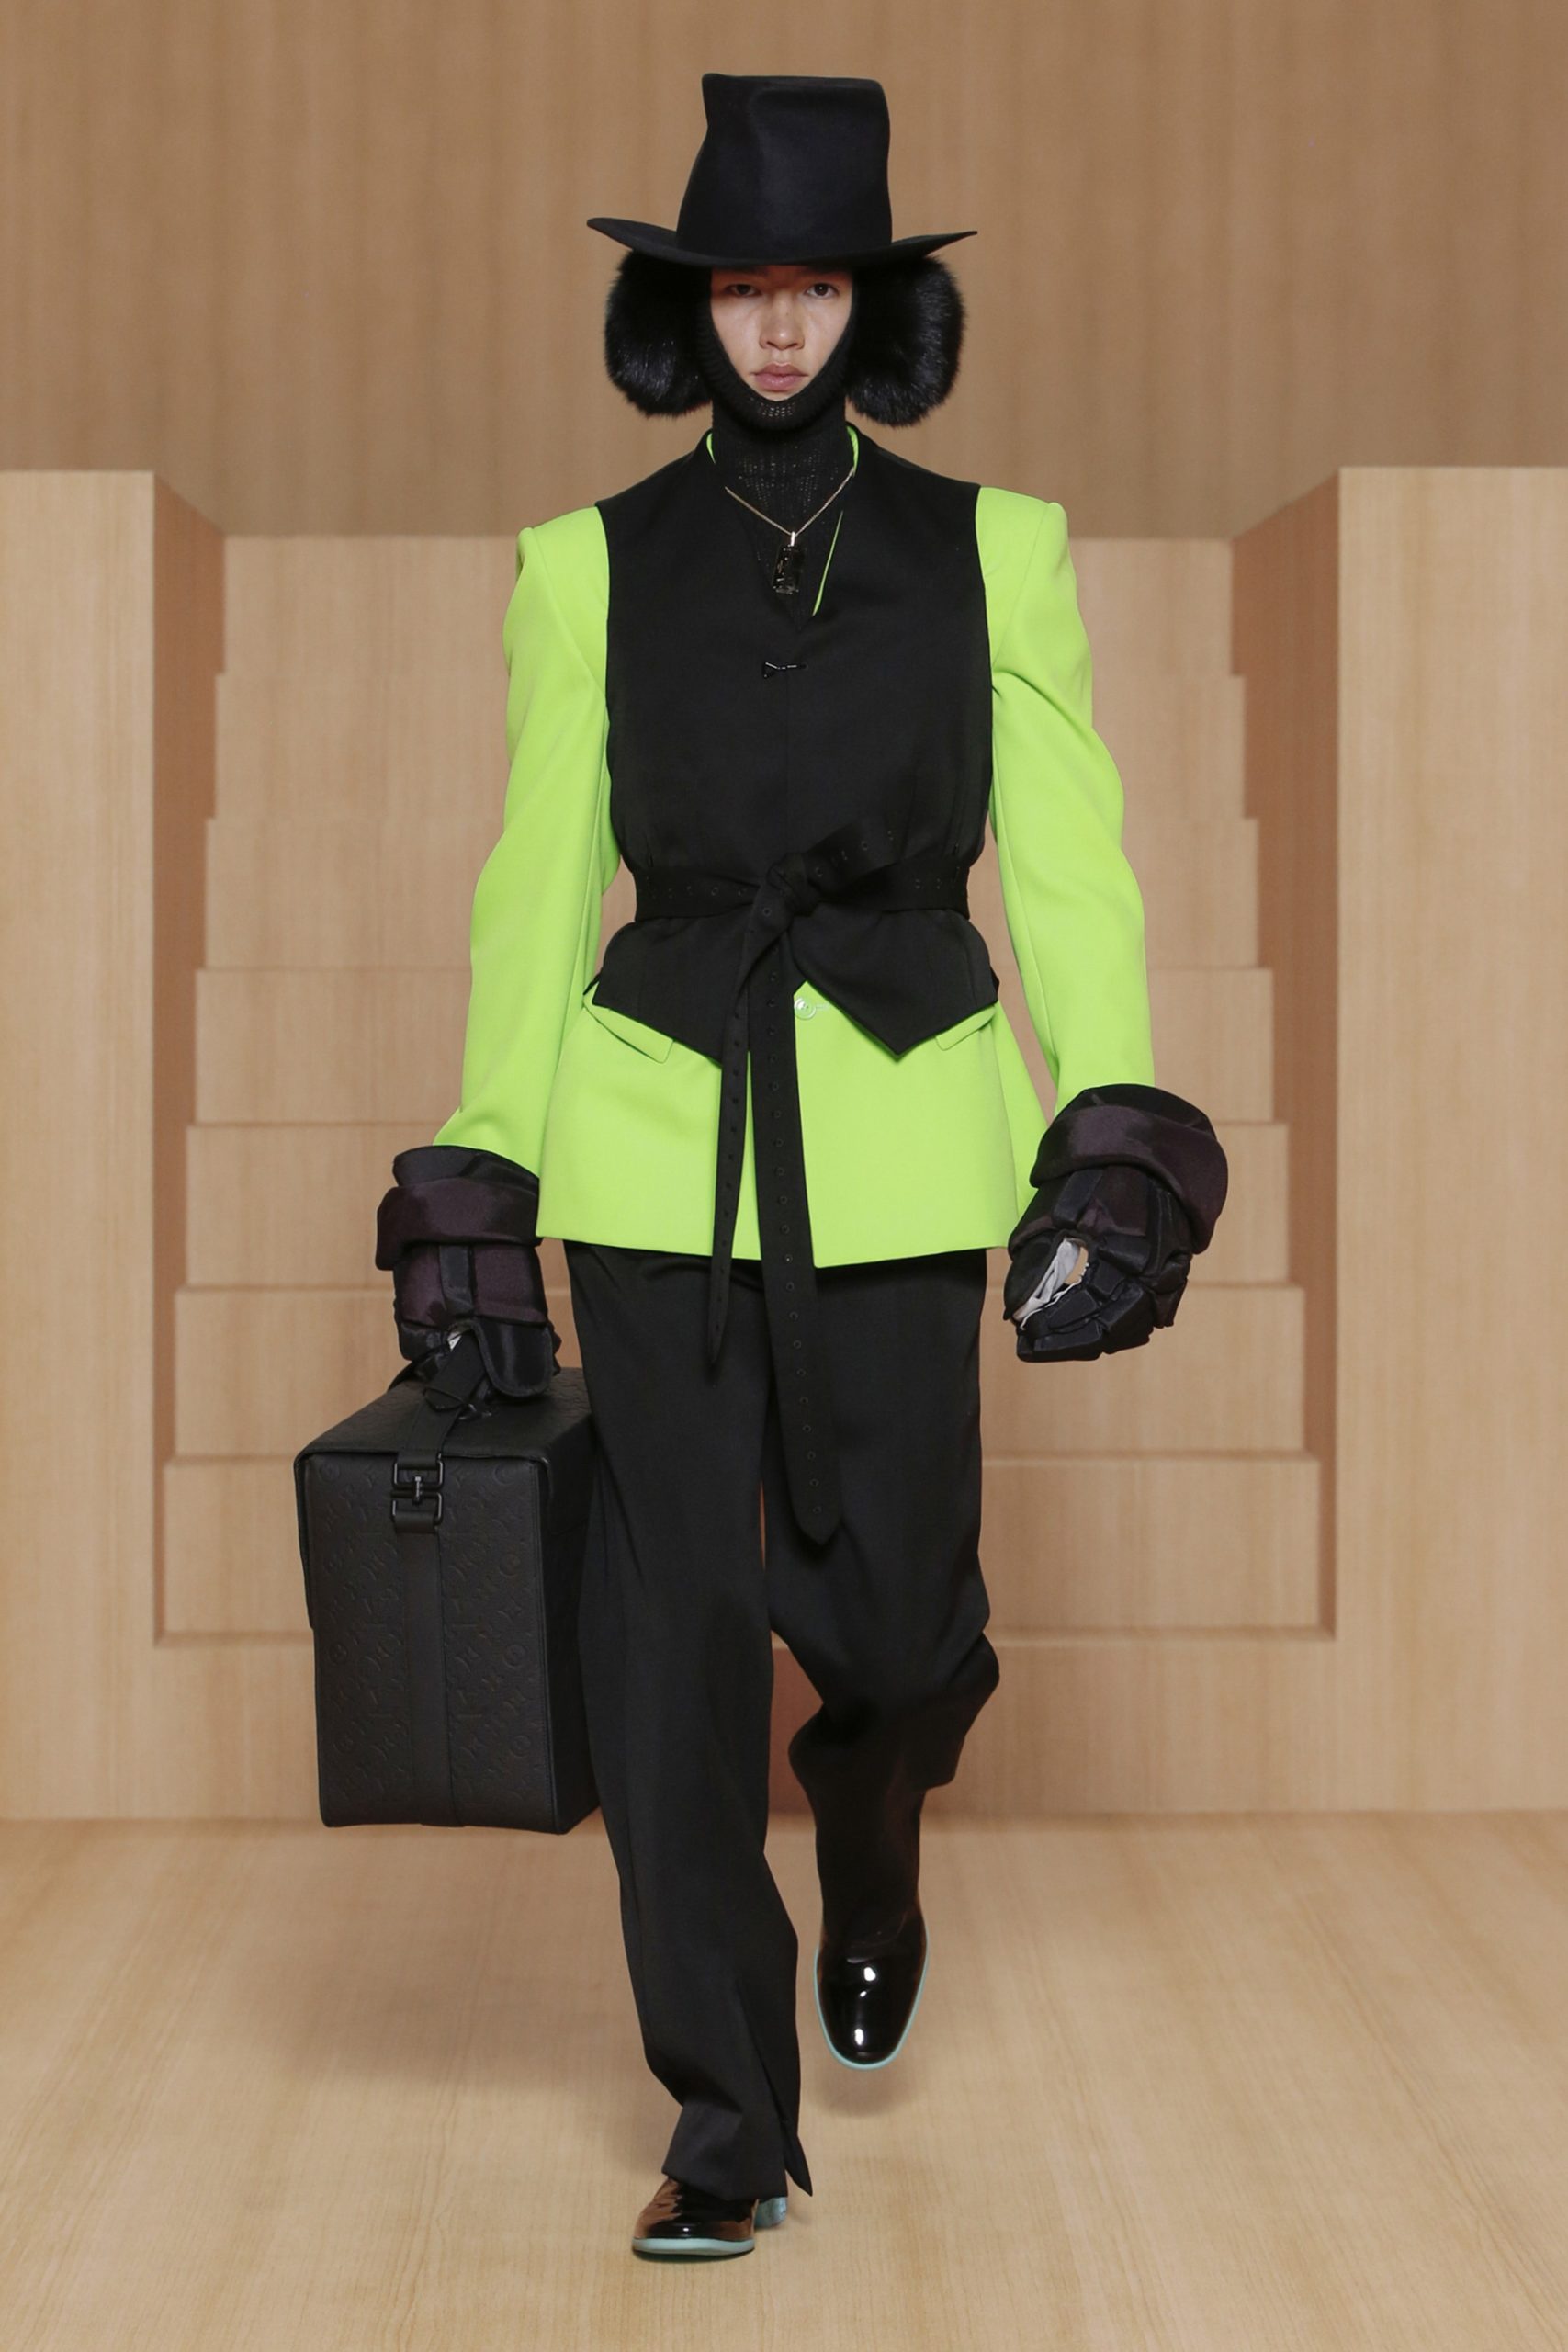 Louis Vuitton Menswear Spring 2022 Show From Miami – PAUSE Online